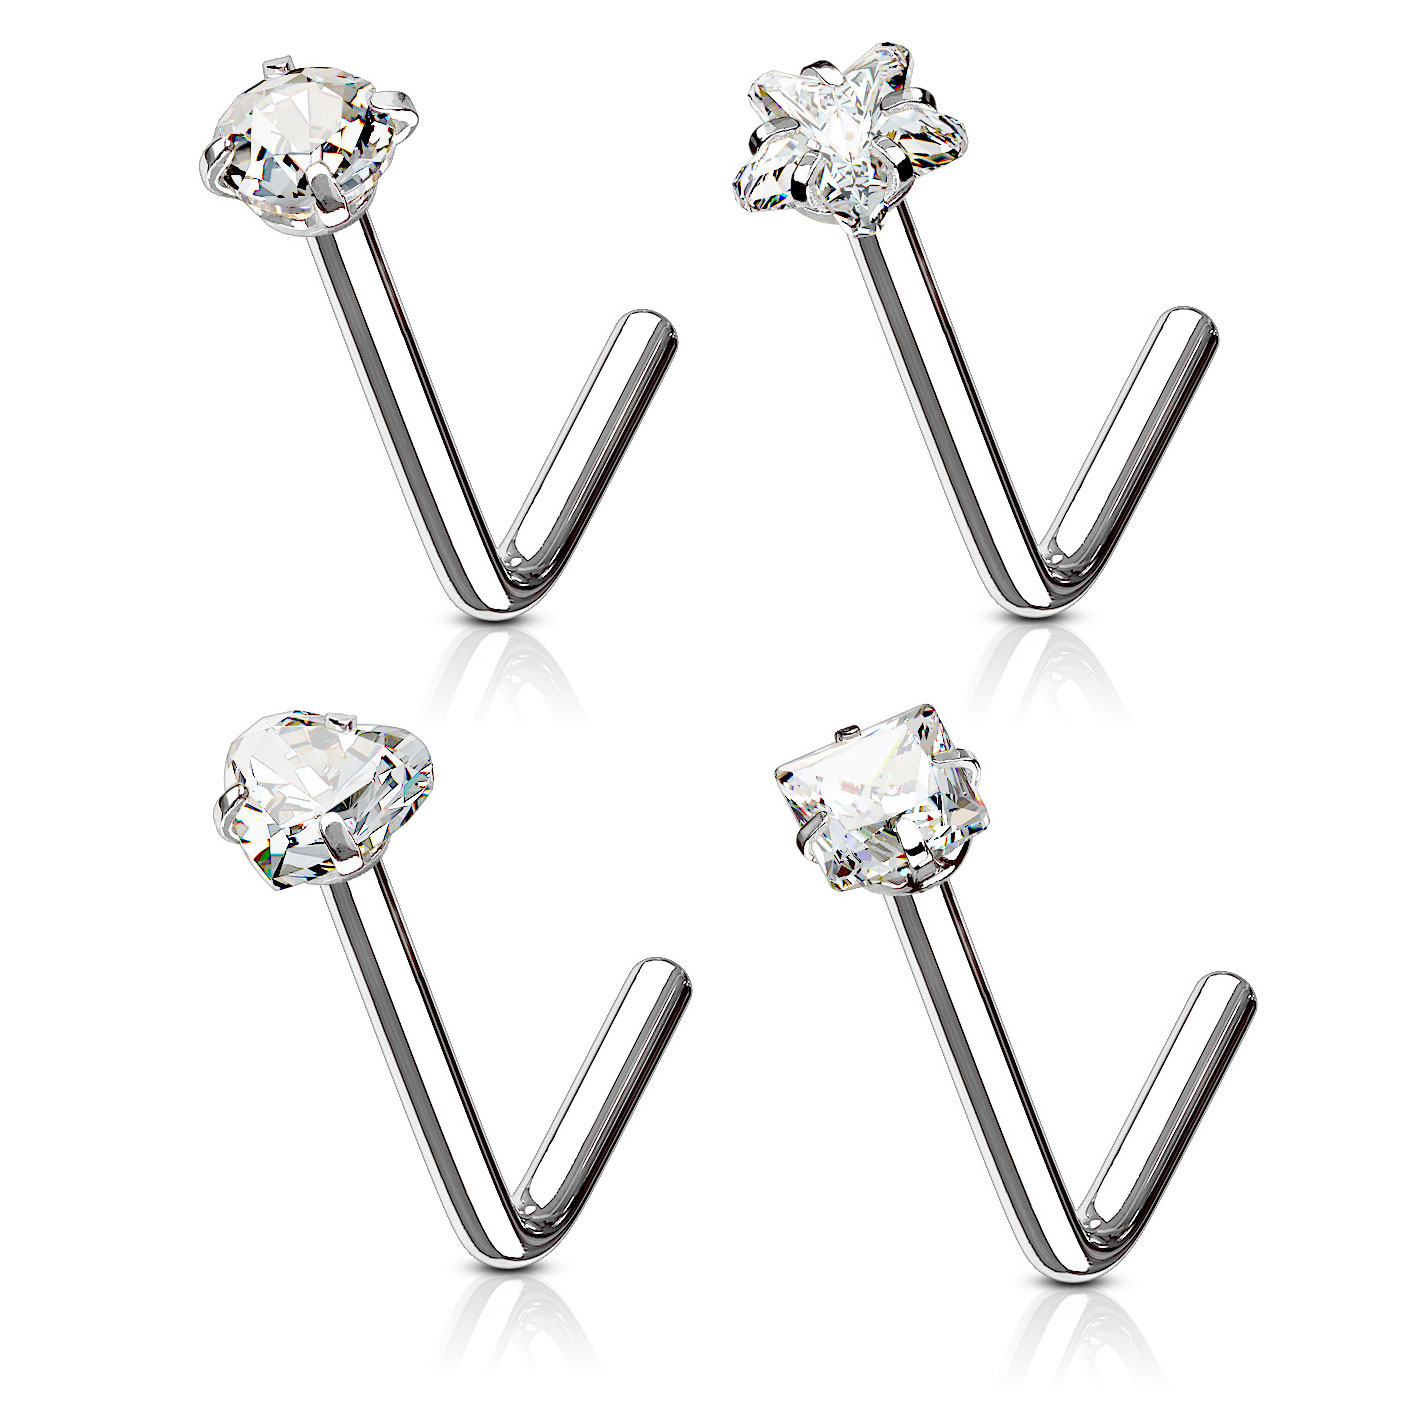 Nose stud in different styles and colors